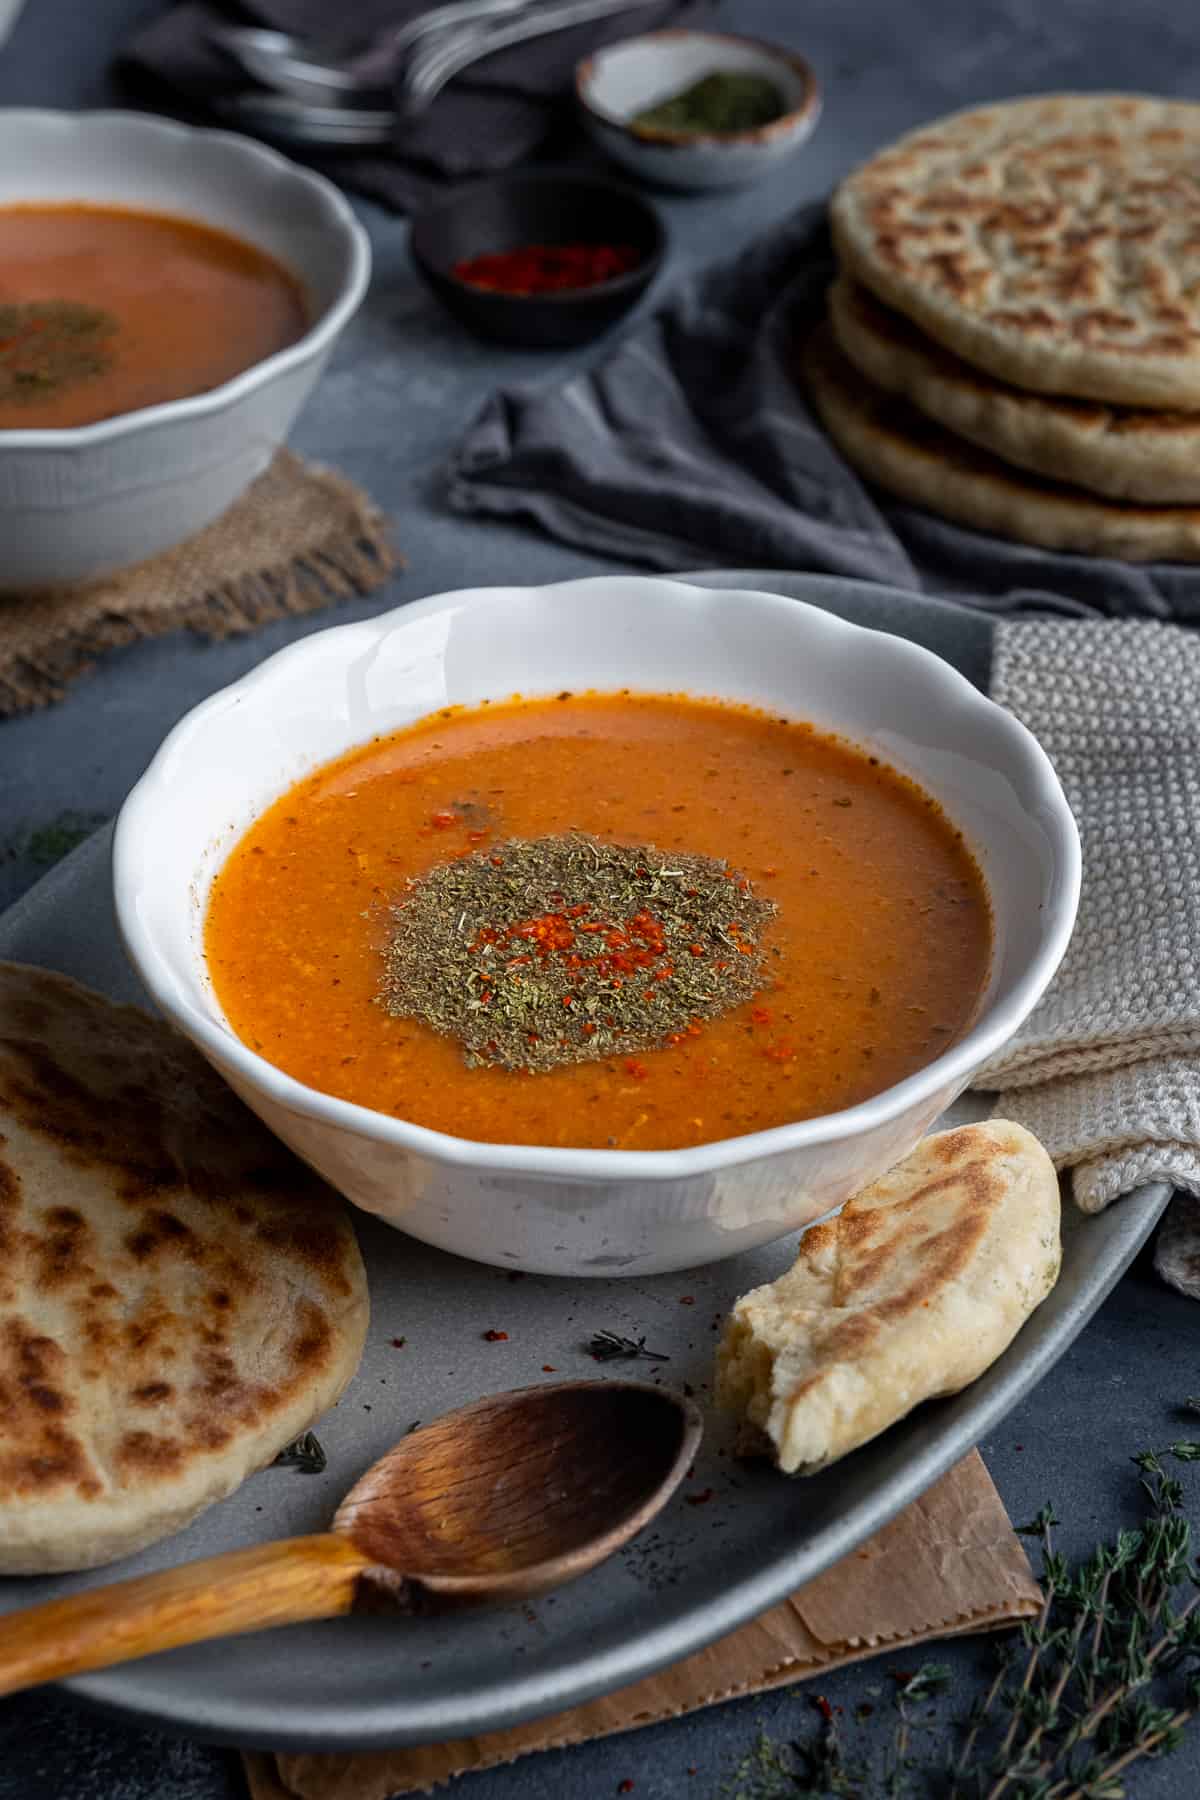 A bowl of tarhana soup garnished with dried mint and red pepper flakes, some bread and a wooden spoon on the side.